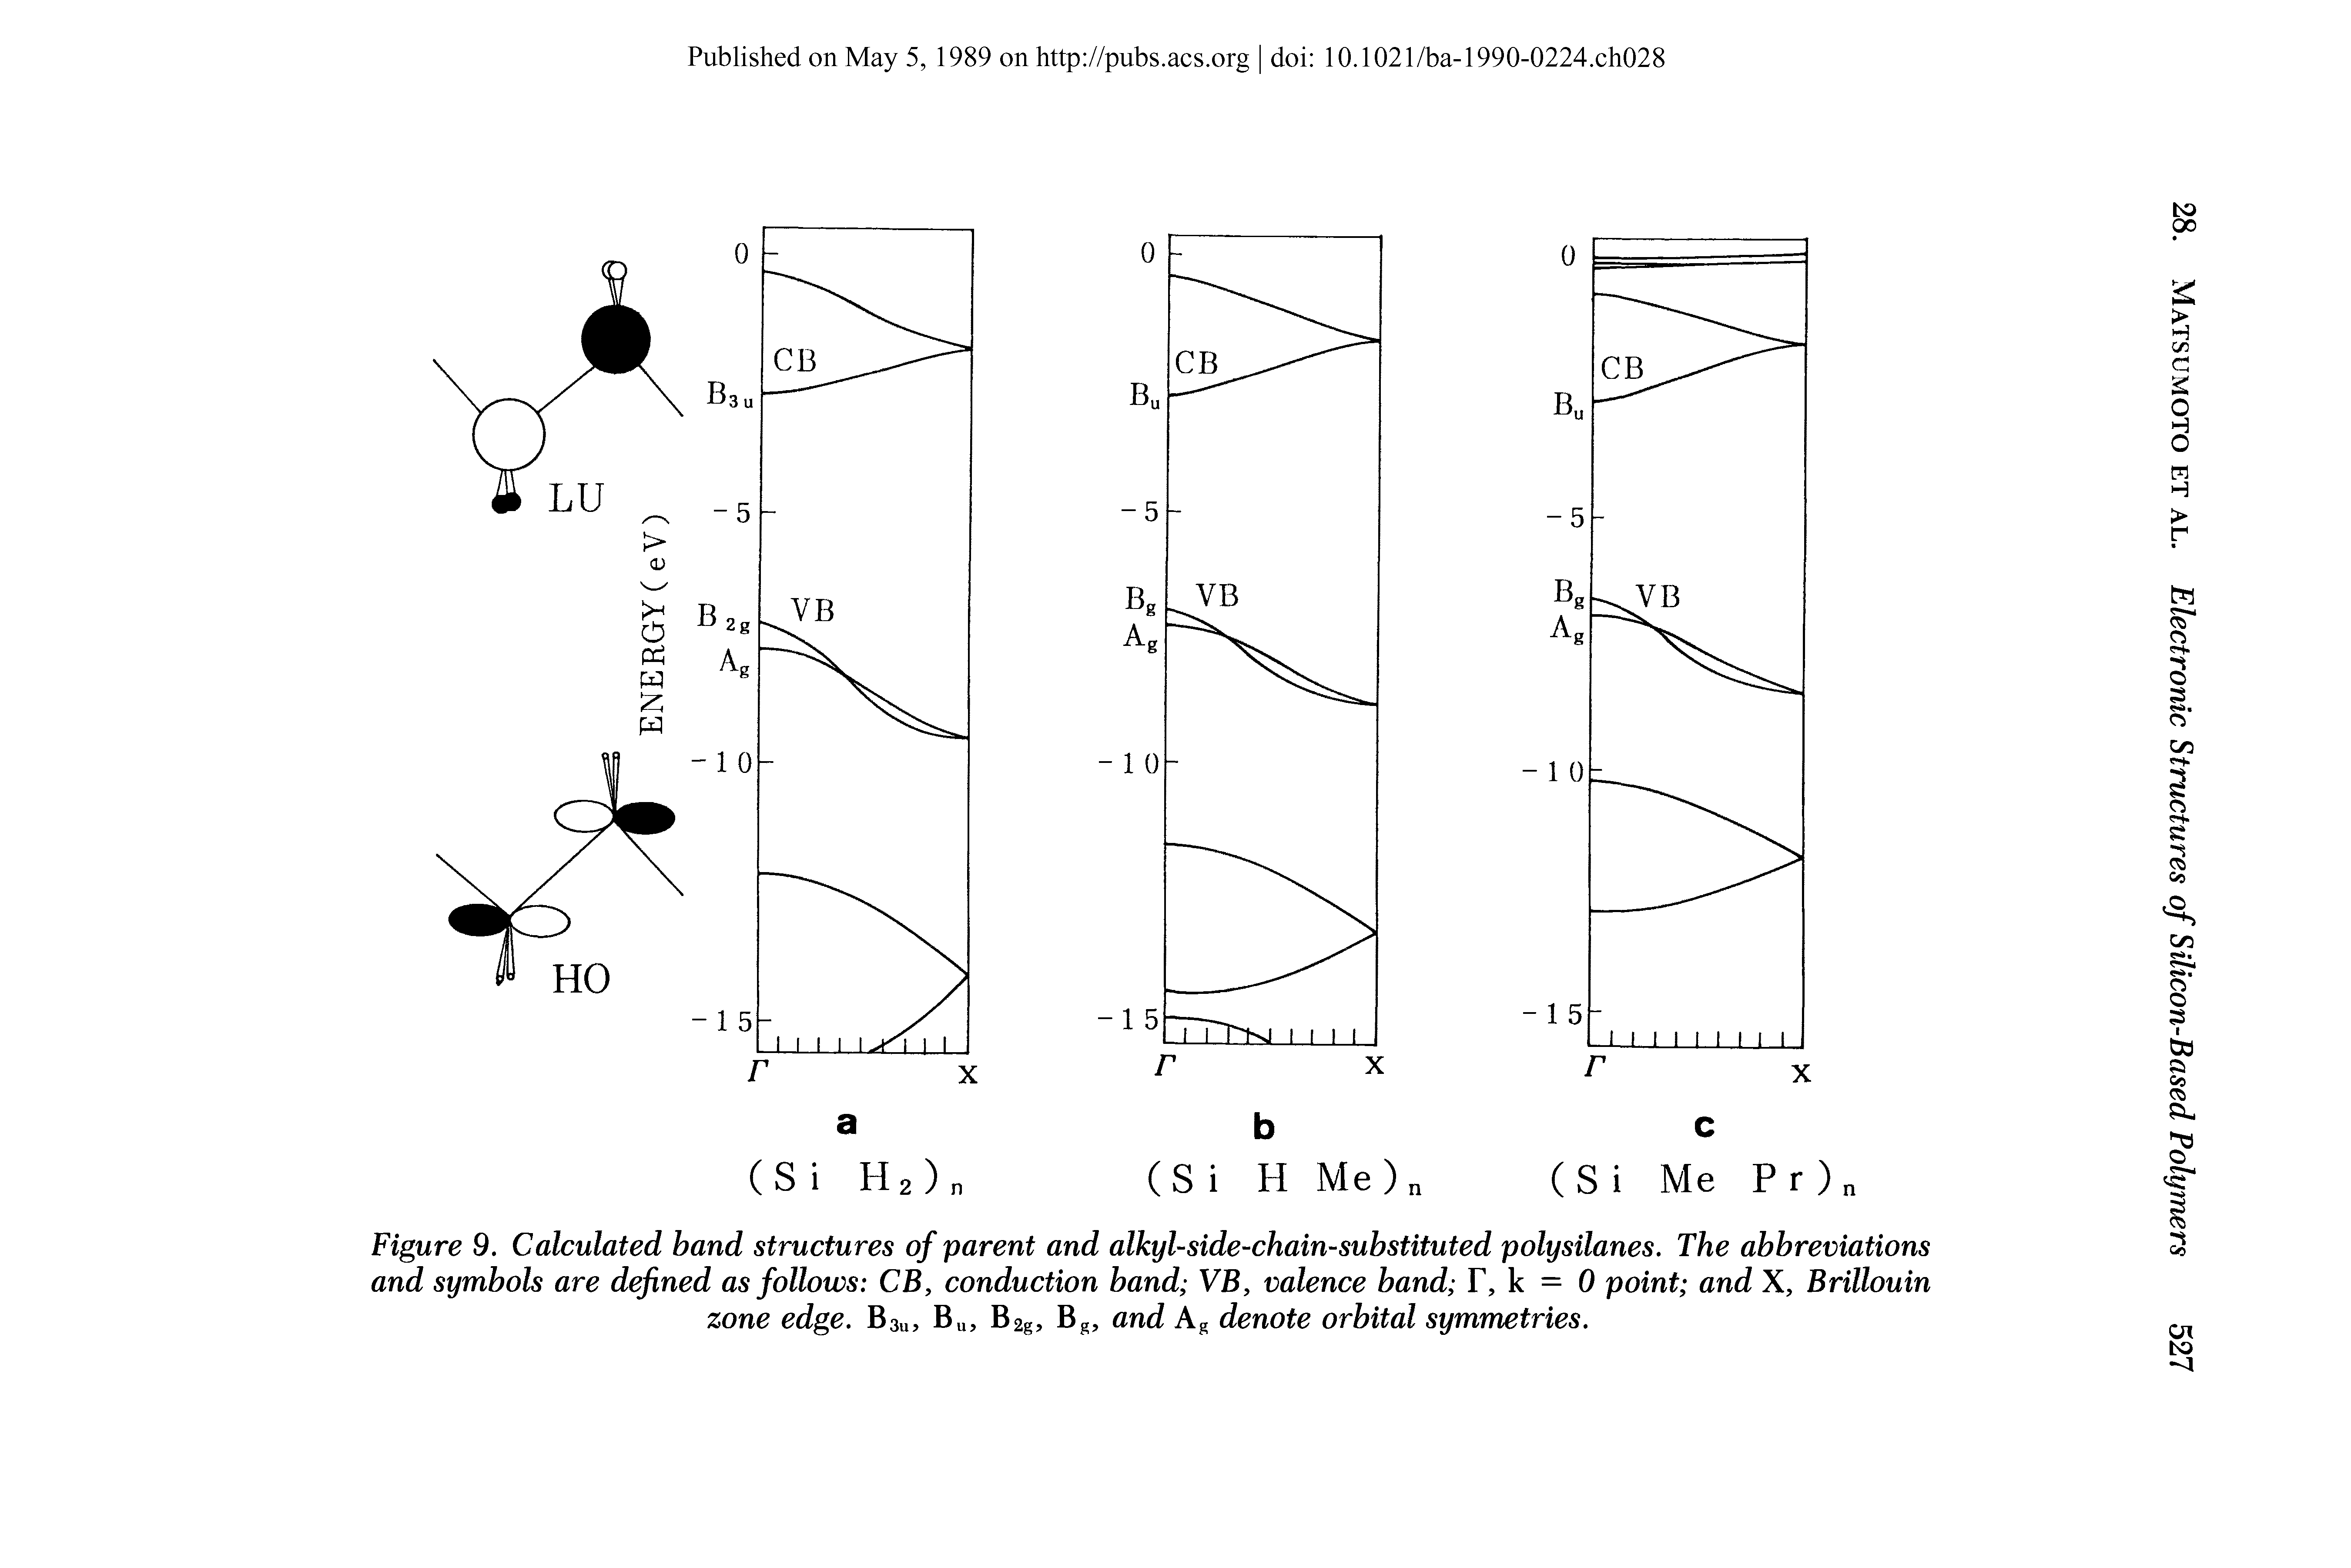 Figure 9. Calculated band structures of parent and alkyl-side-chain-substituted polysilanes. The abbreviations and symbols are defined as follows CB, conduction band VB, valence band F, k = 0 point and X, Brillouin zone edge. Bsu, Bu, B2g, Bg, and Ag denote orbital symmetries.